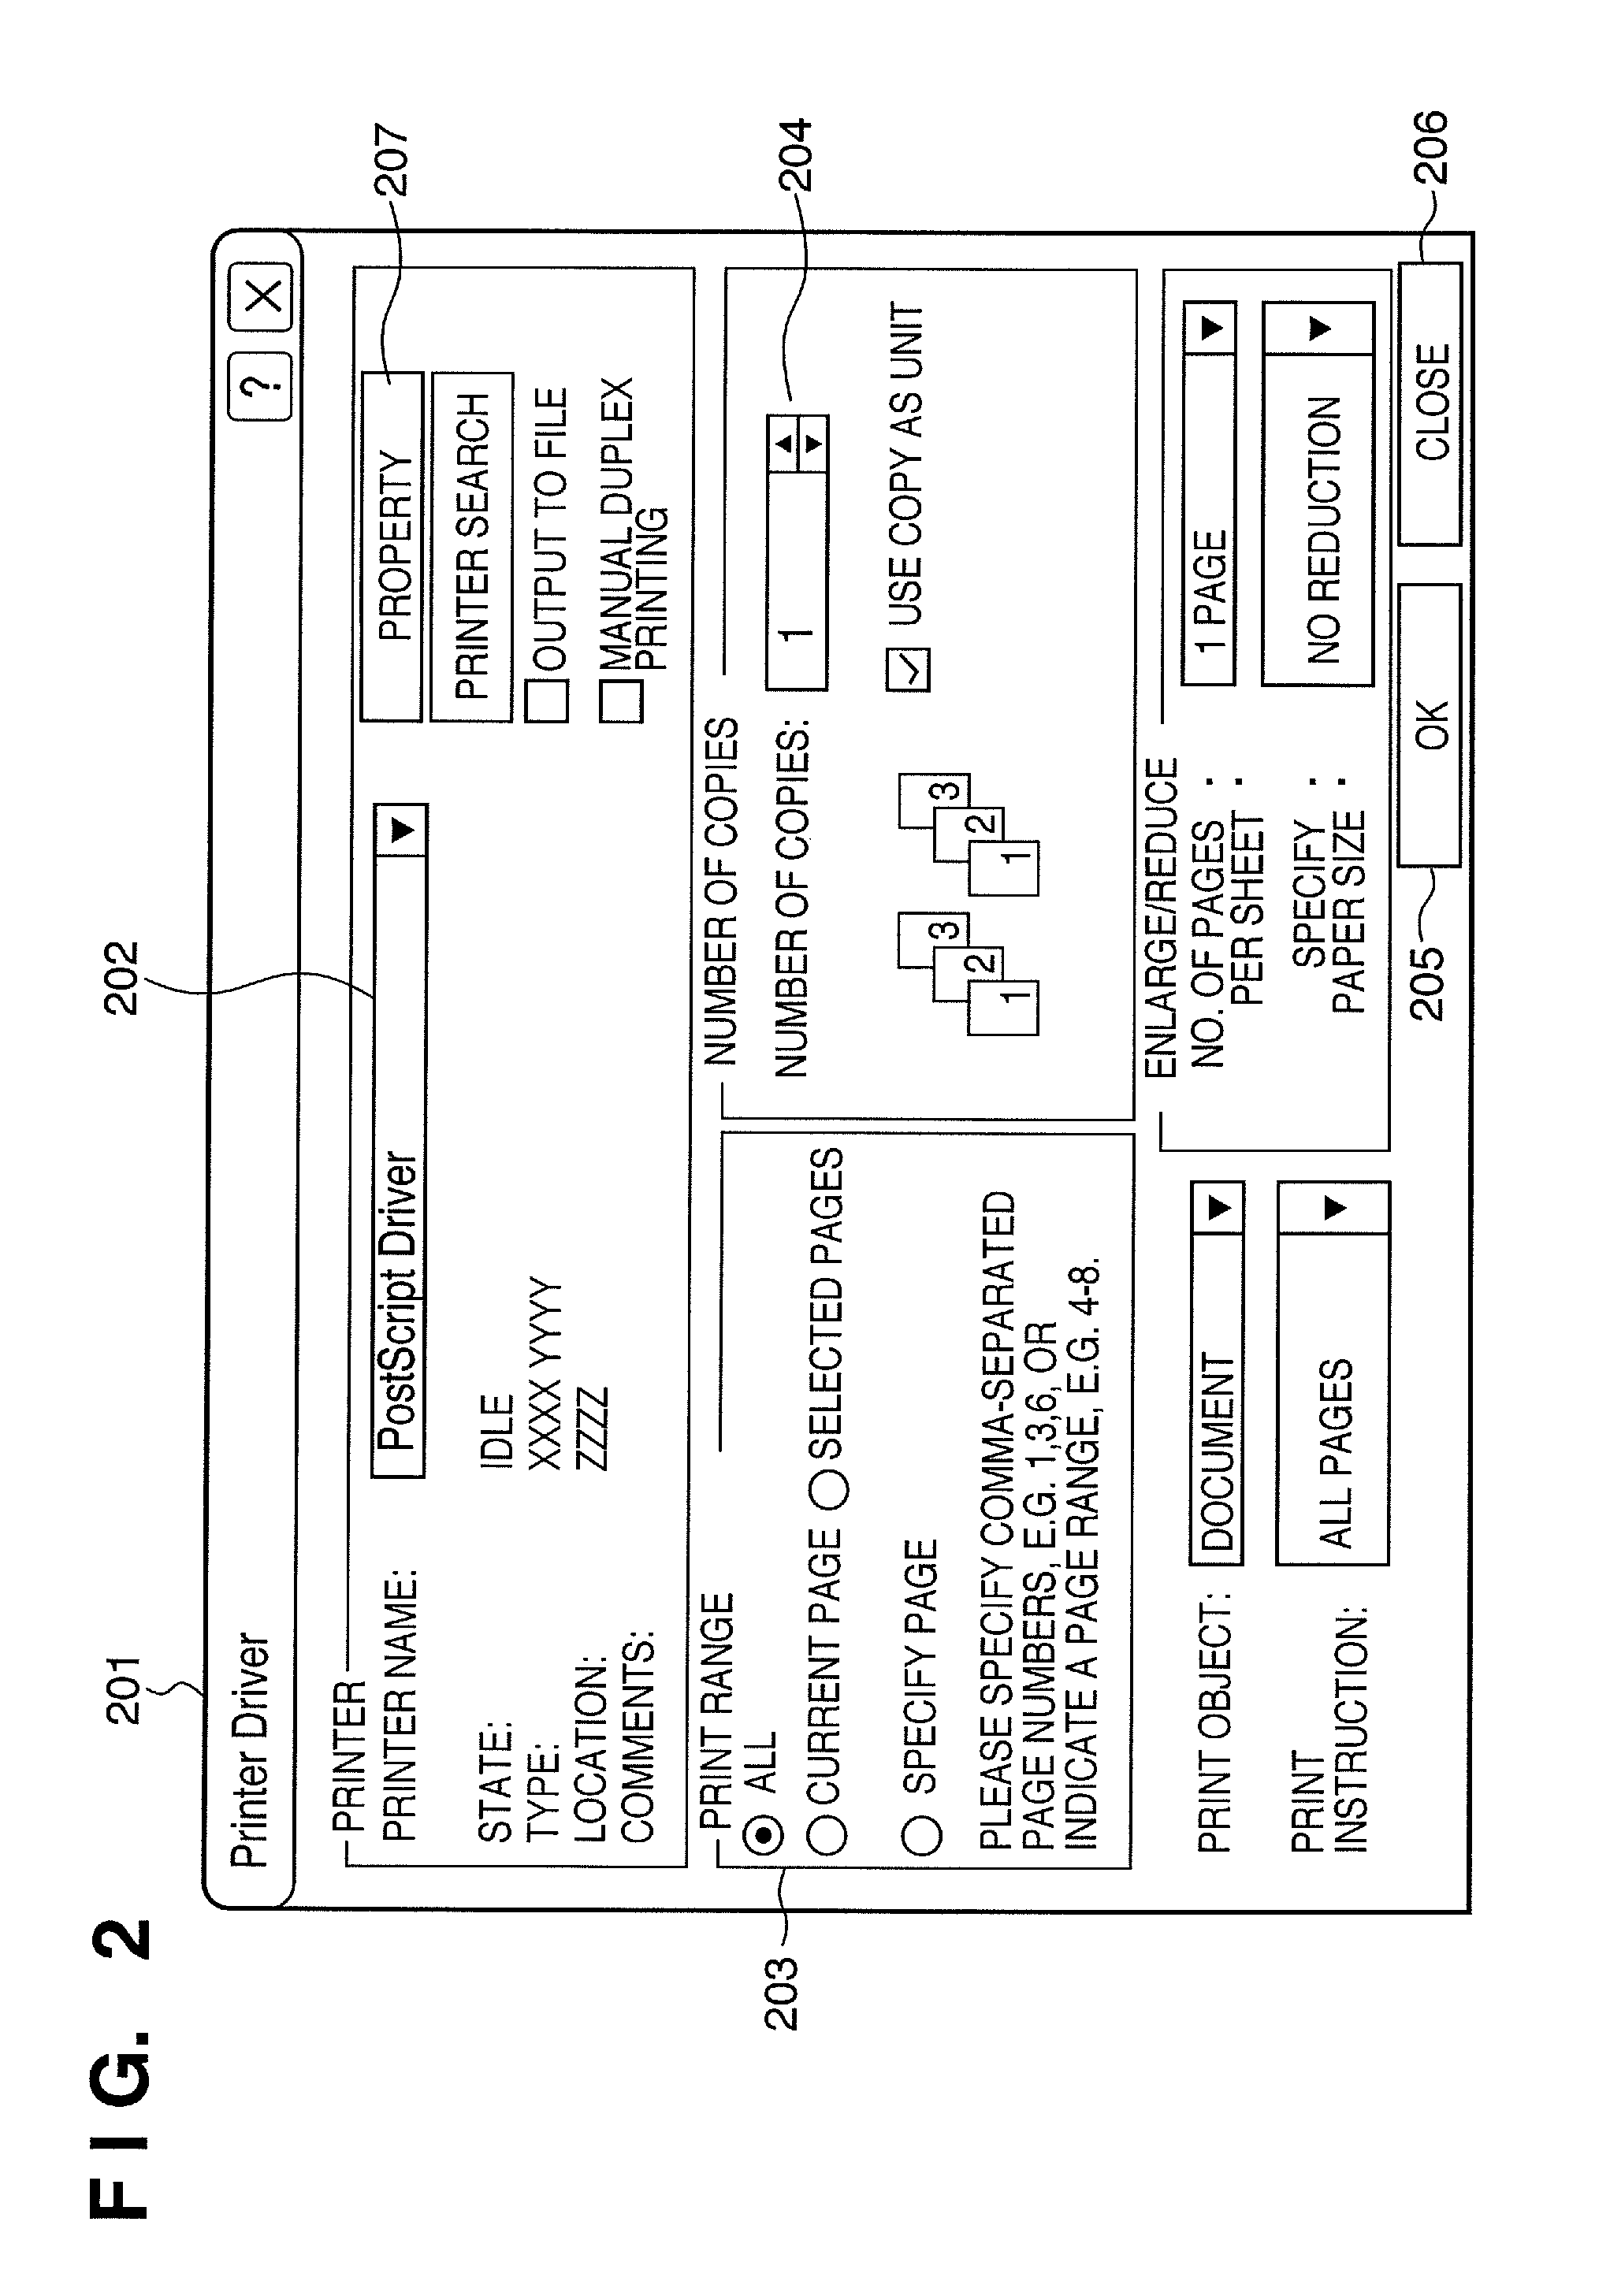 Document processing apparatus and a method for controlling a document processing apparatus